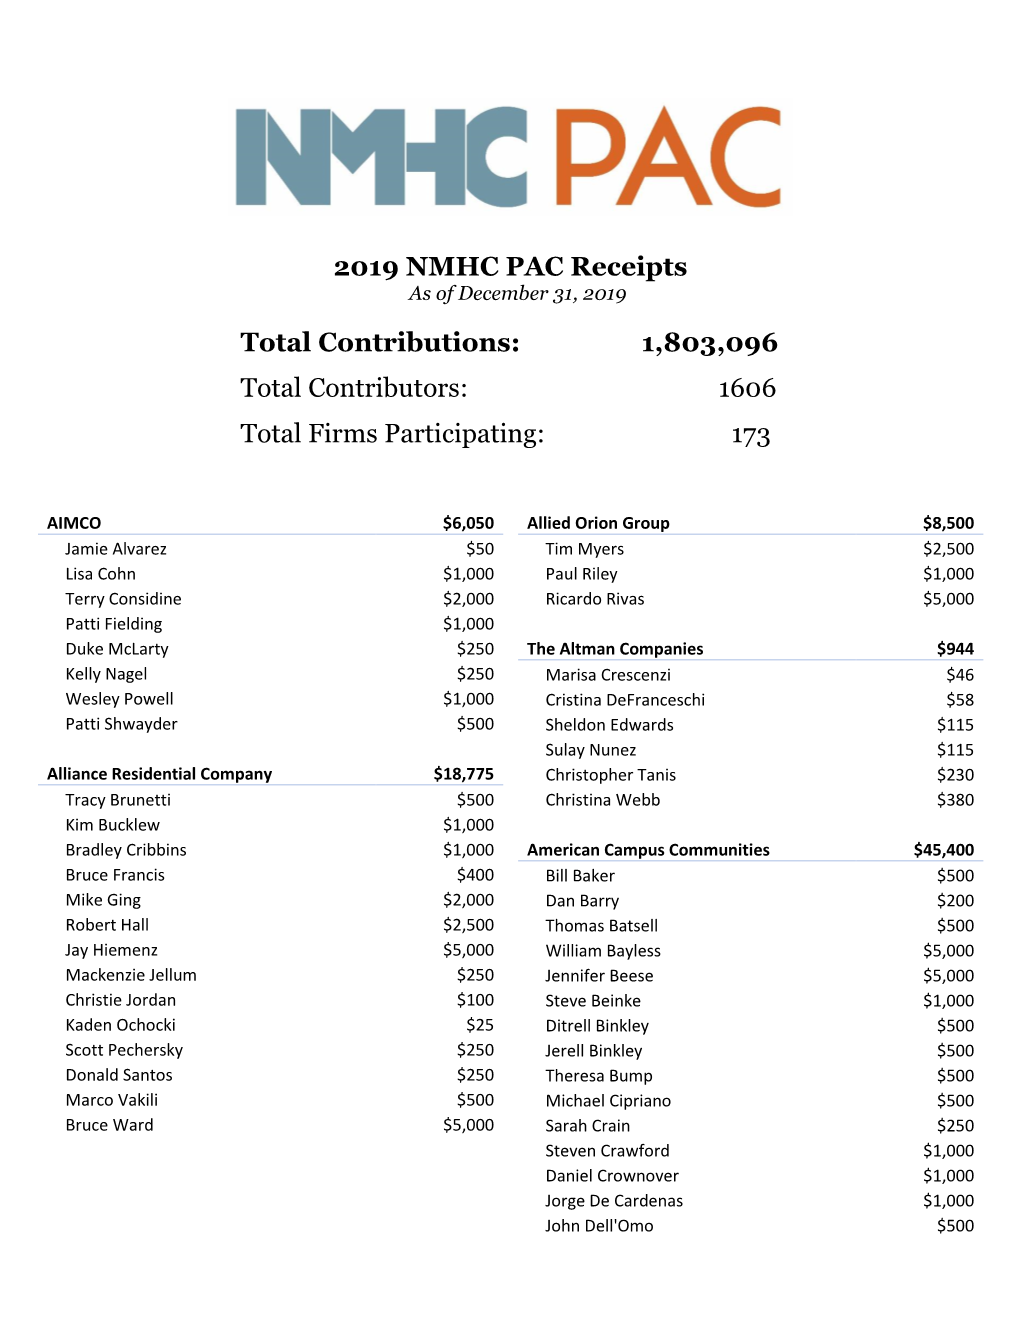 2019 NMHC PAC Receipts Total Contributions